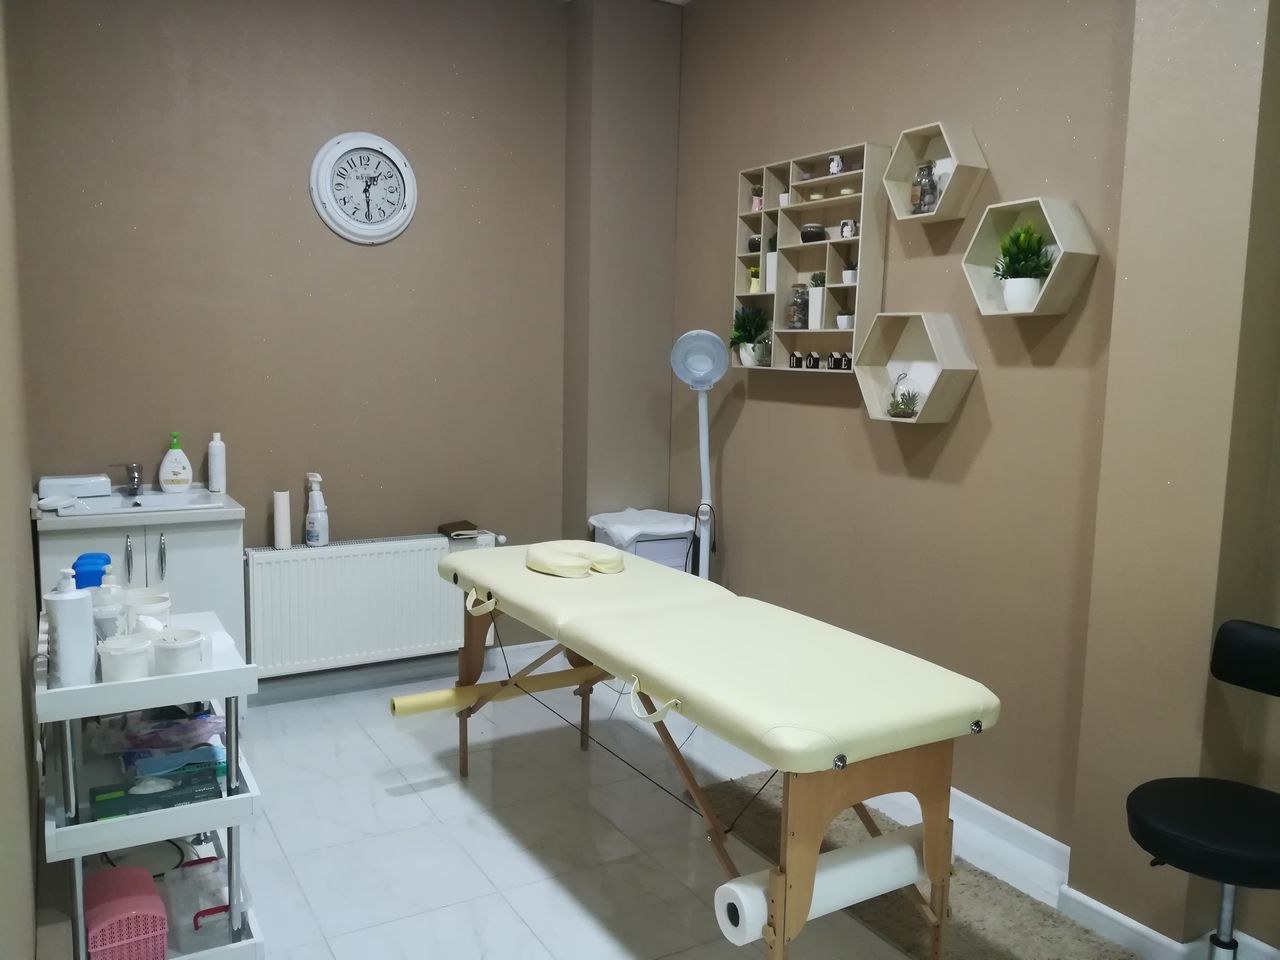 Purchase of salon equipment for waxing in Israel